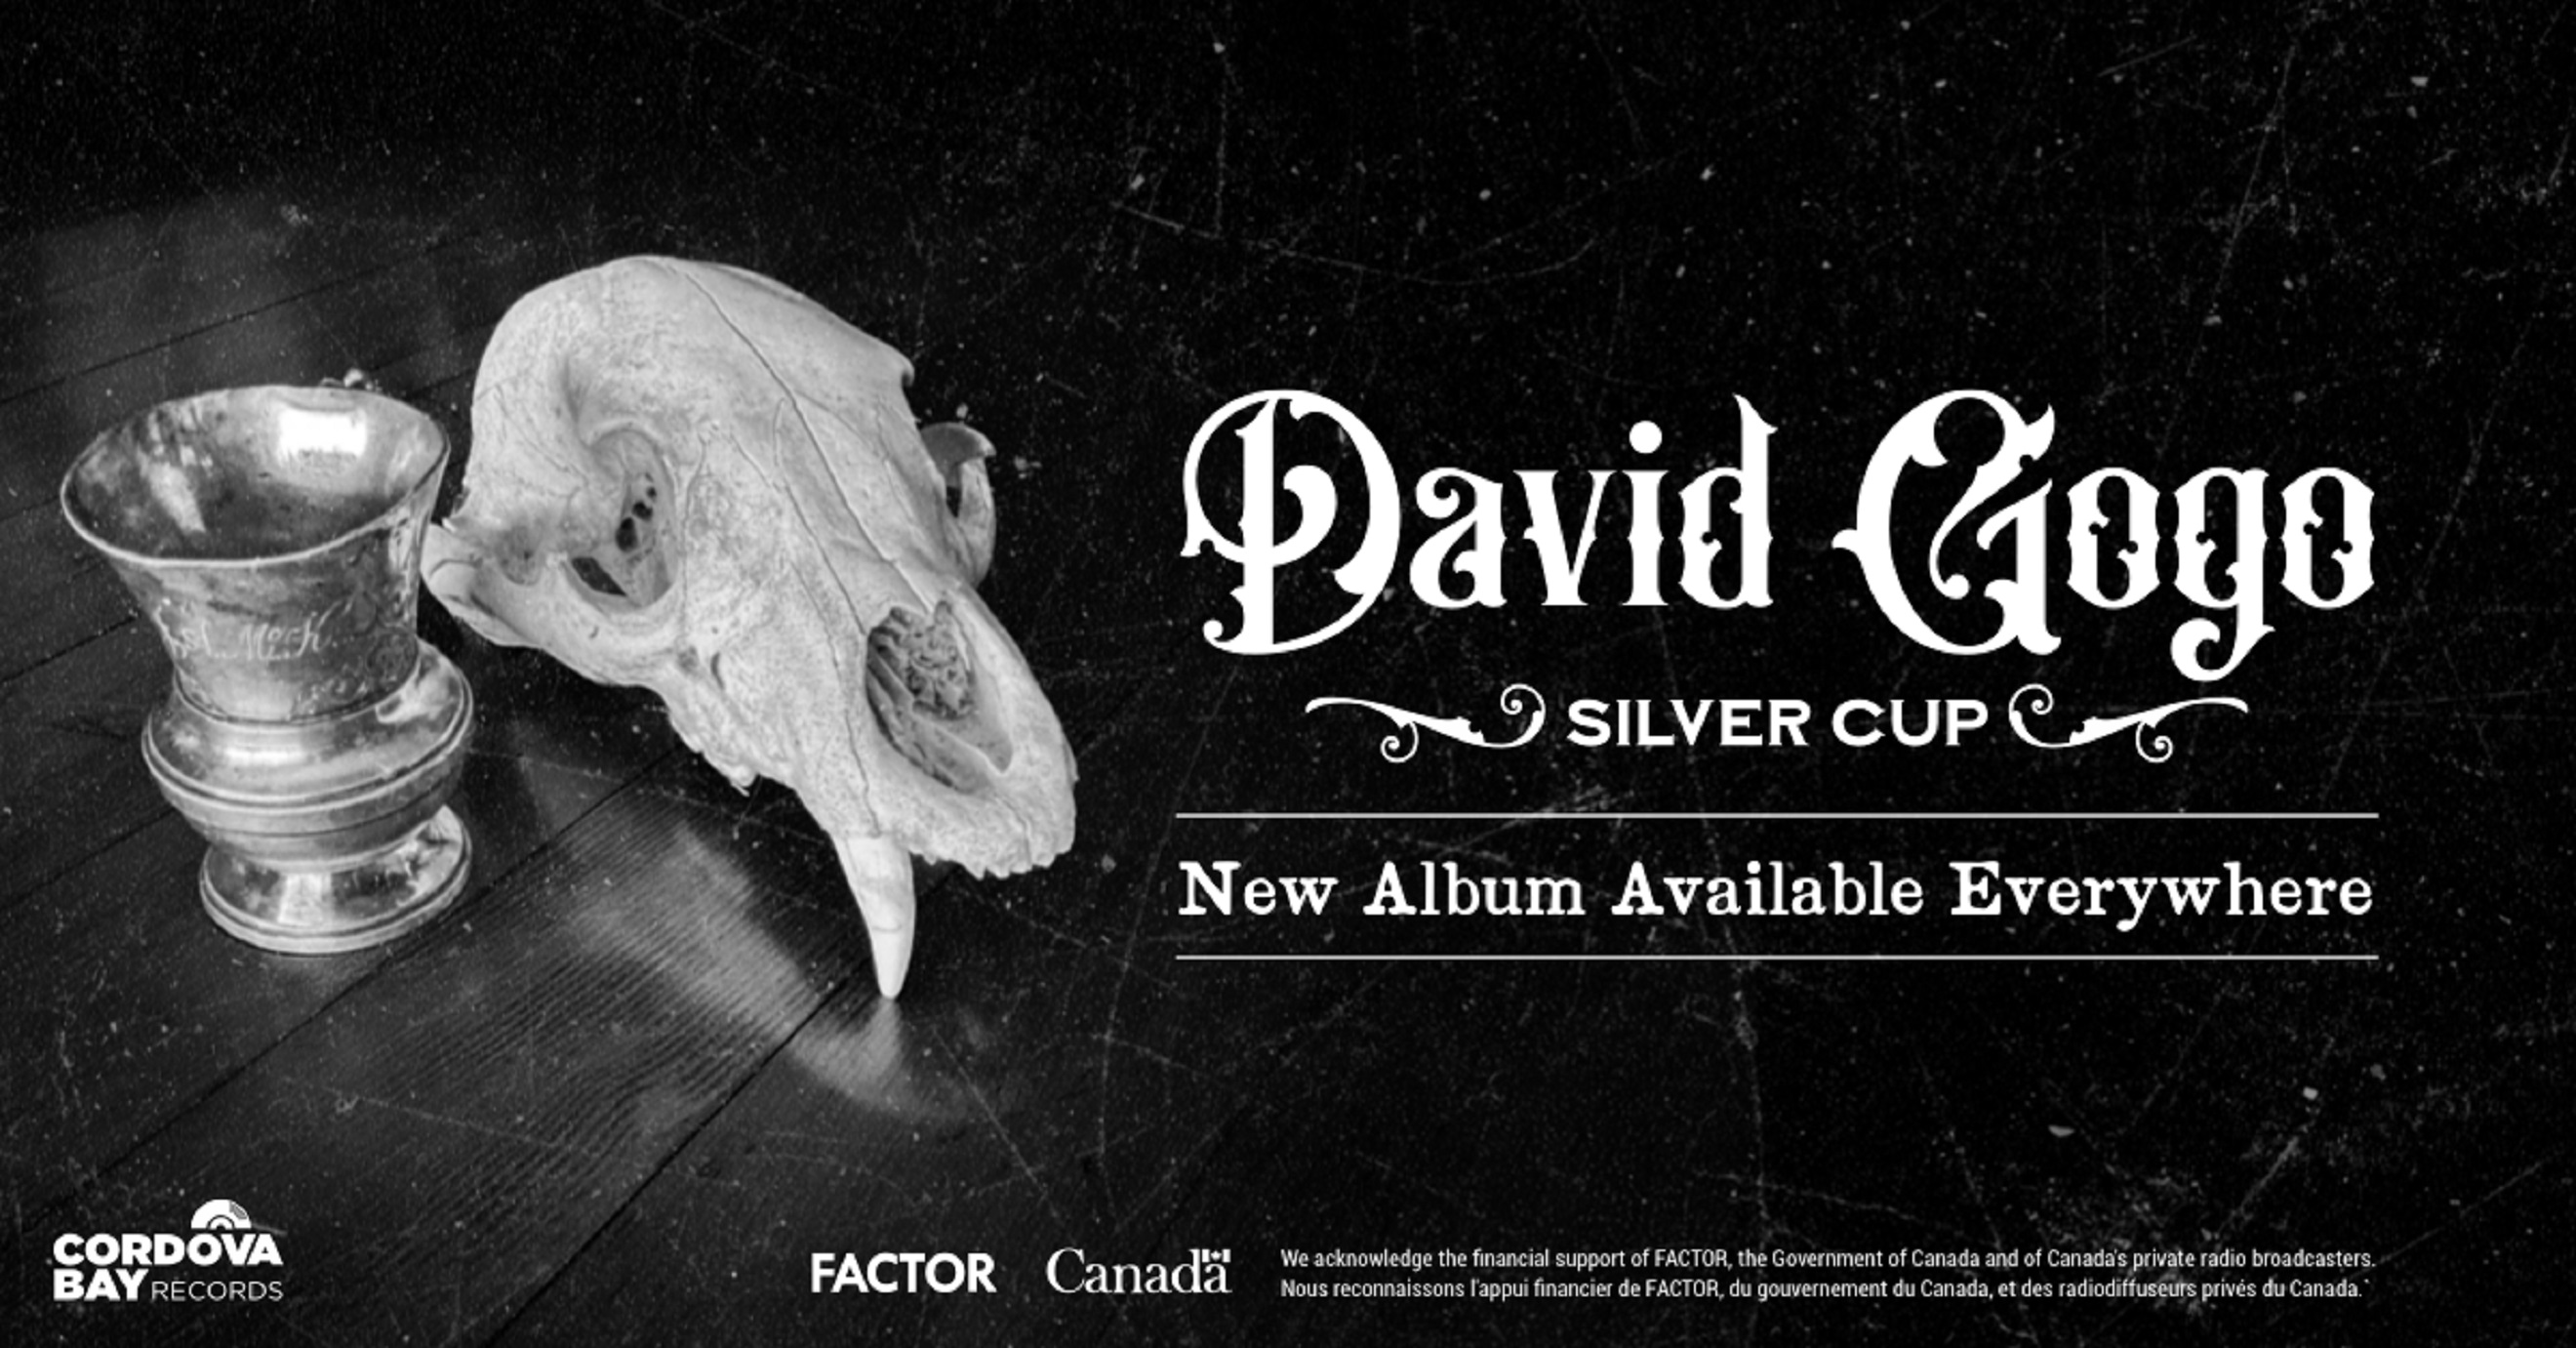 David Gogo Sips from a Silver Cup in New Album